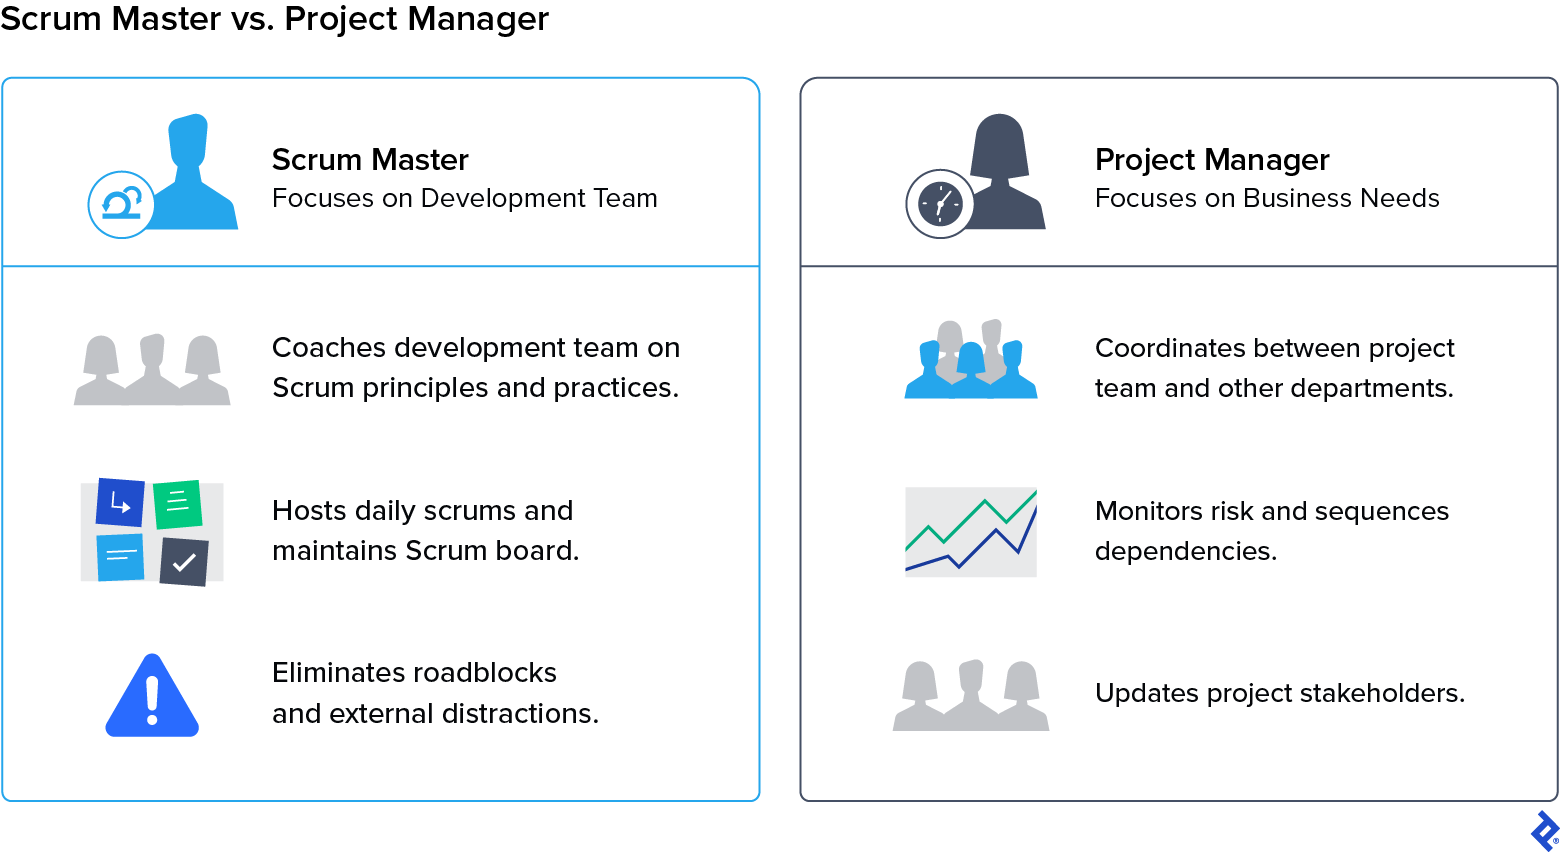 A Scrum master guides and supports the development team, while a project manager coordinates business needs across departments and teams.